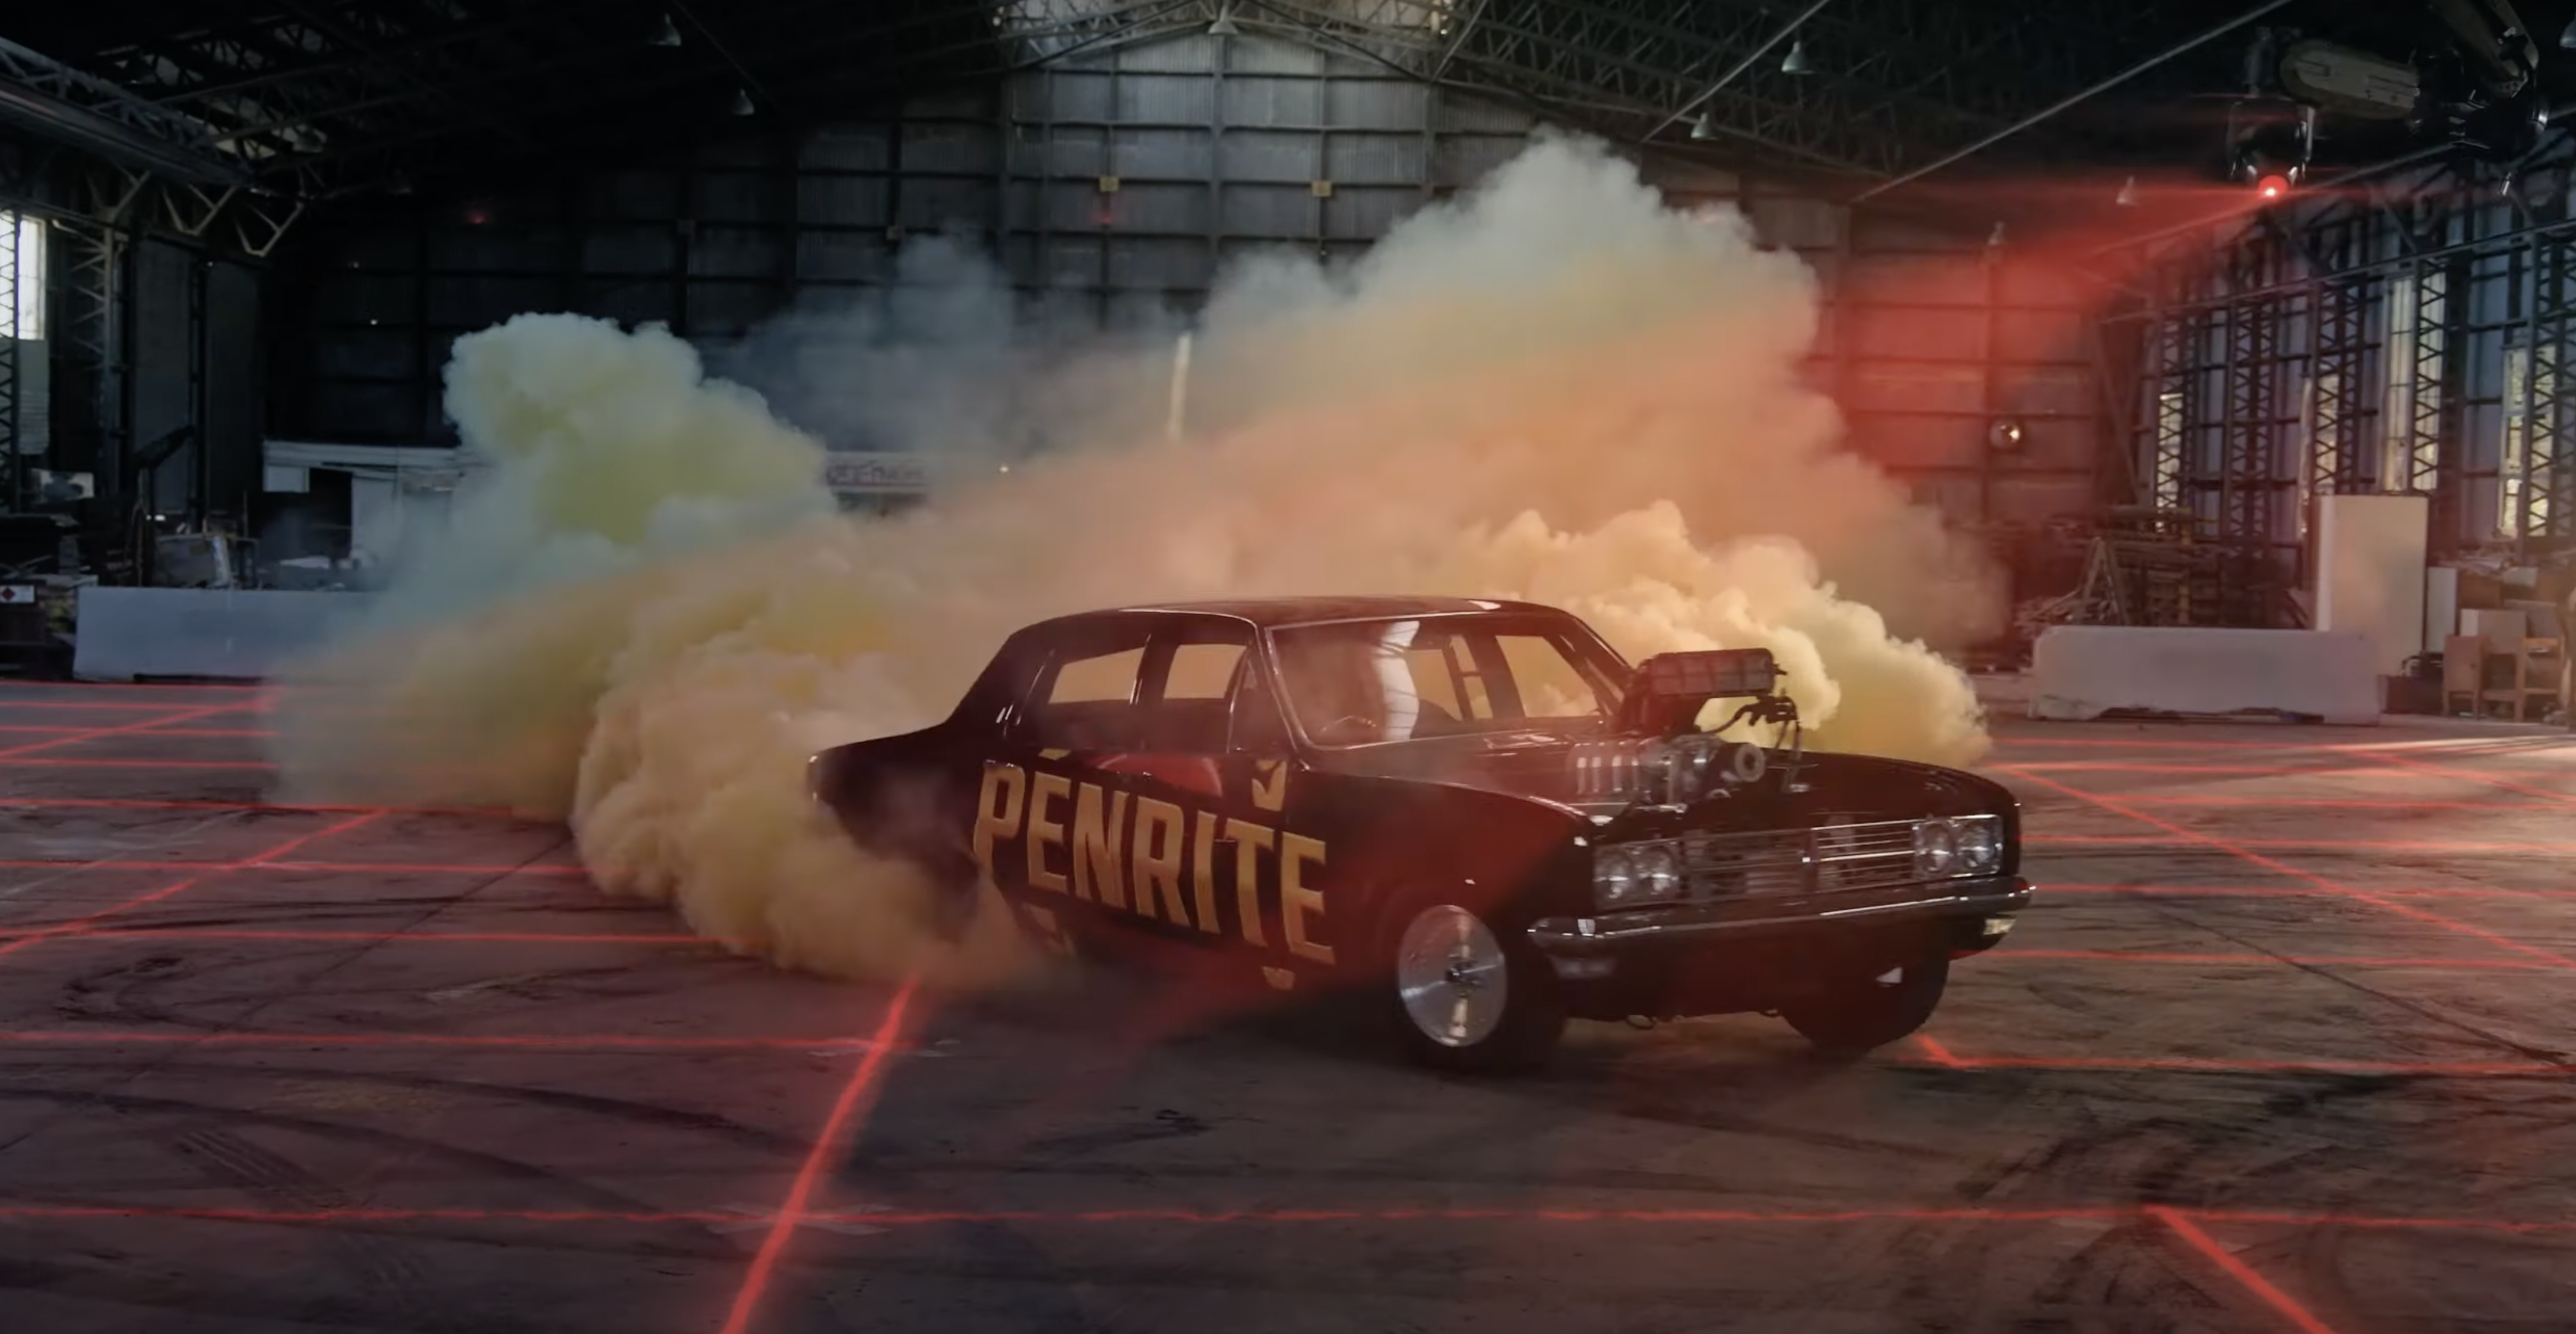 Octane Island: Supercheap Auto's Hollywood-Inspired Ad Campaign